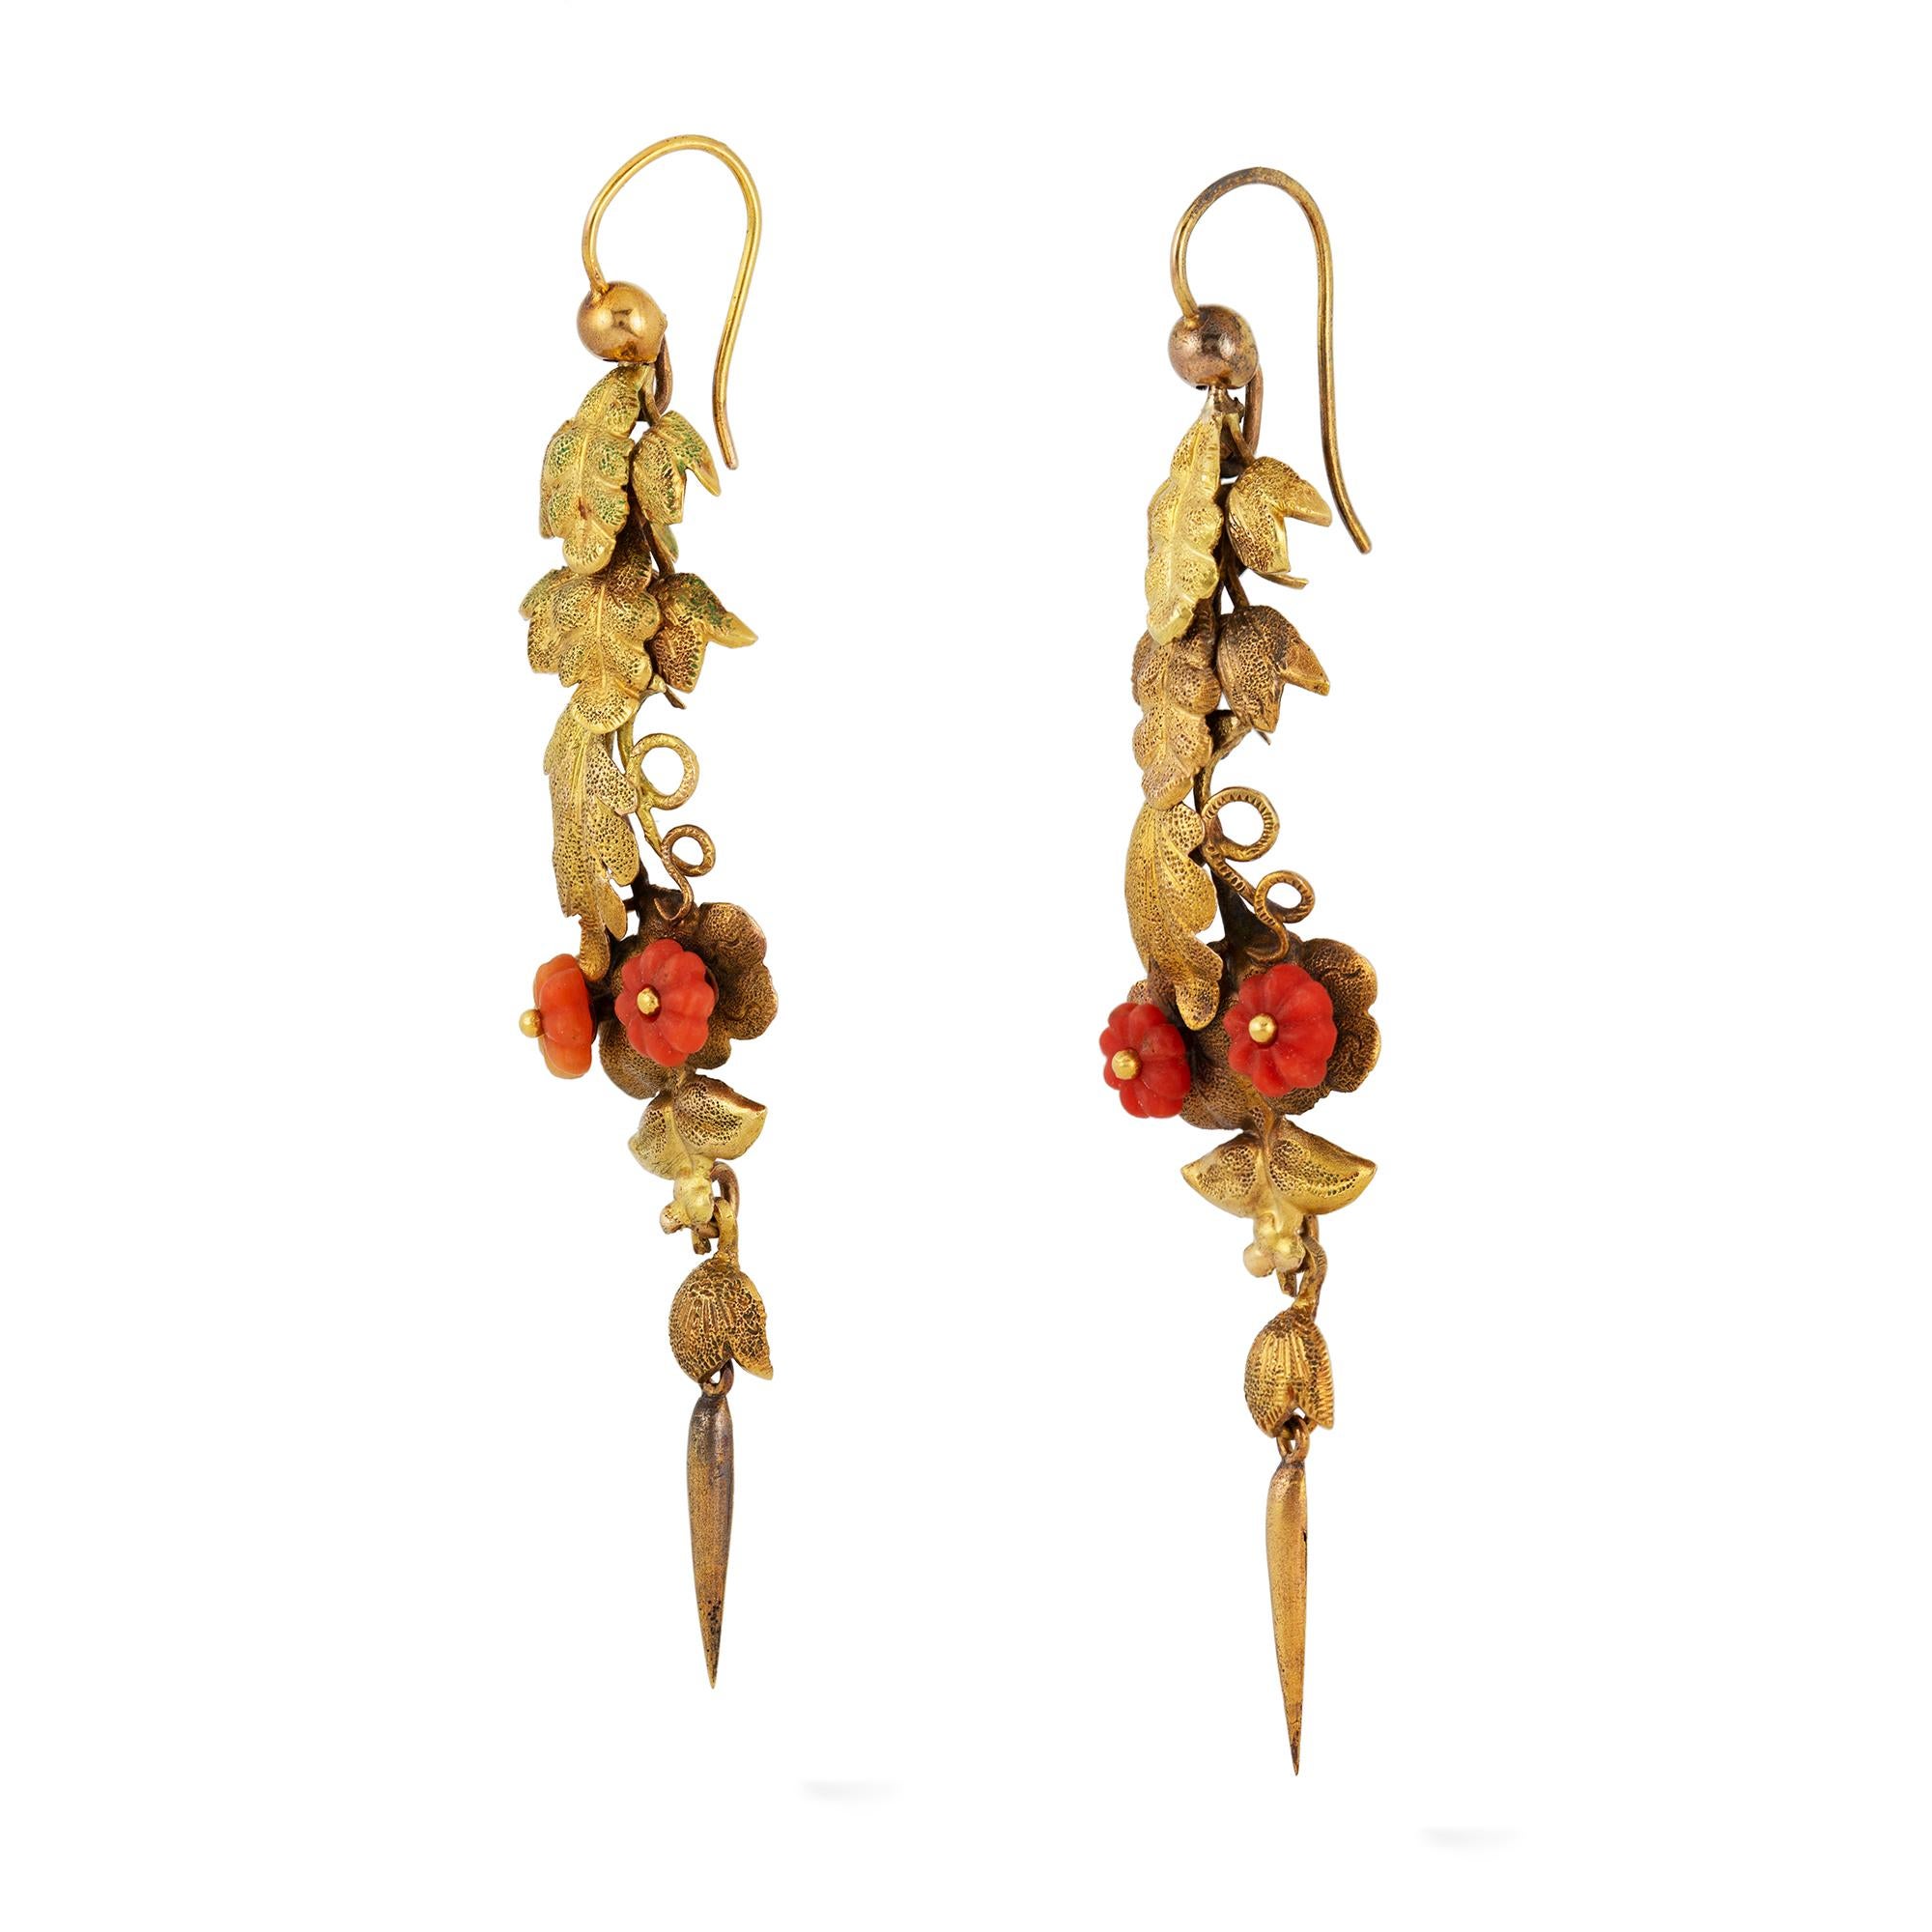 A pair of early Victorian gold and coral leaf drop earrings, each earrings with gold foliate and tendril decorations, flanked with two carved coral flowerheads, mounted in gold, circa 1830, measuring approximately 5.9 x 1.3cm, gross weight 4.1